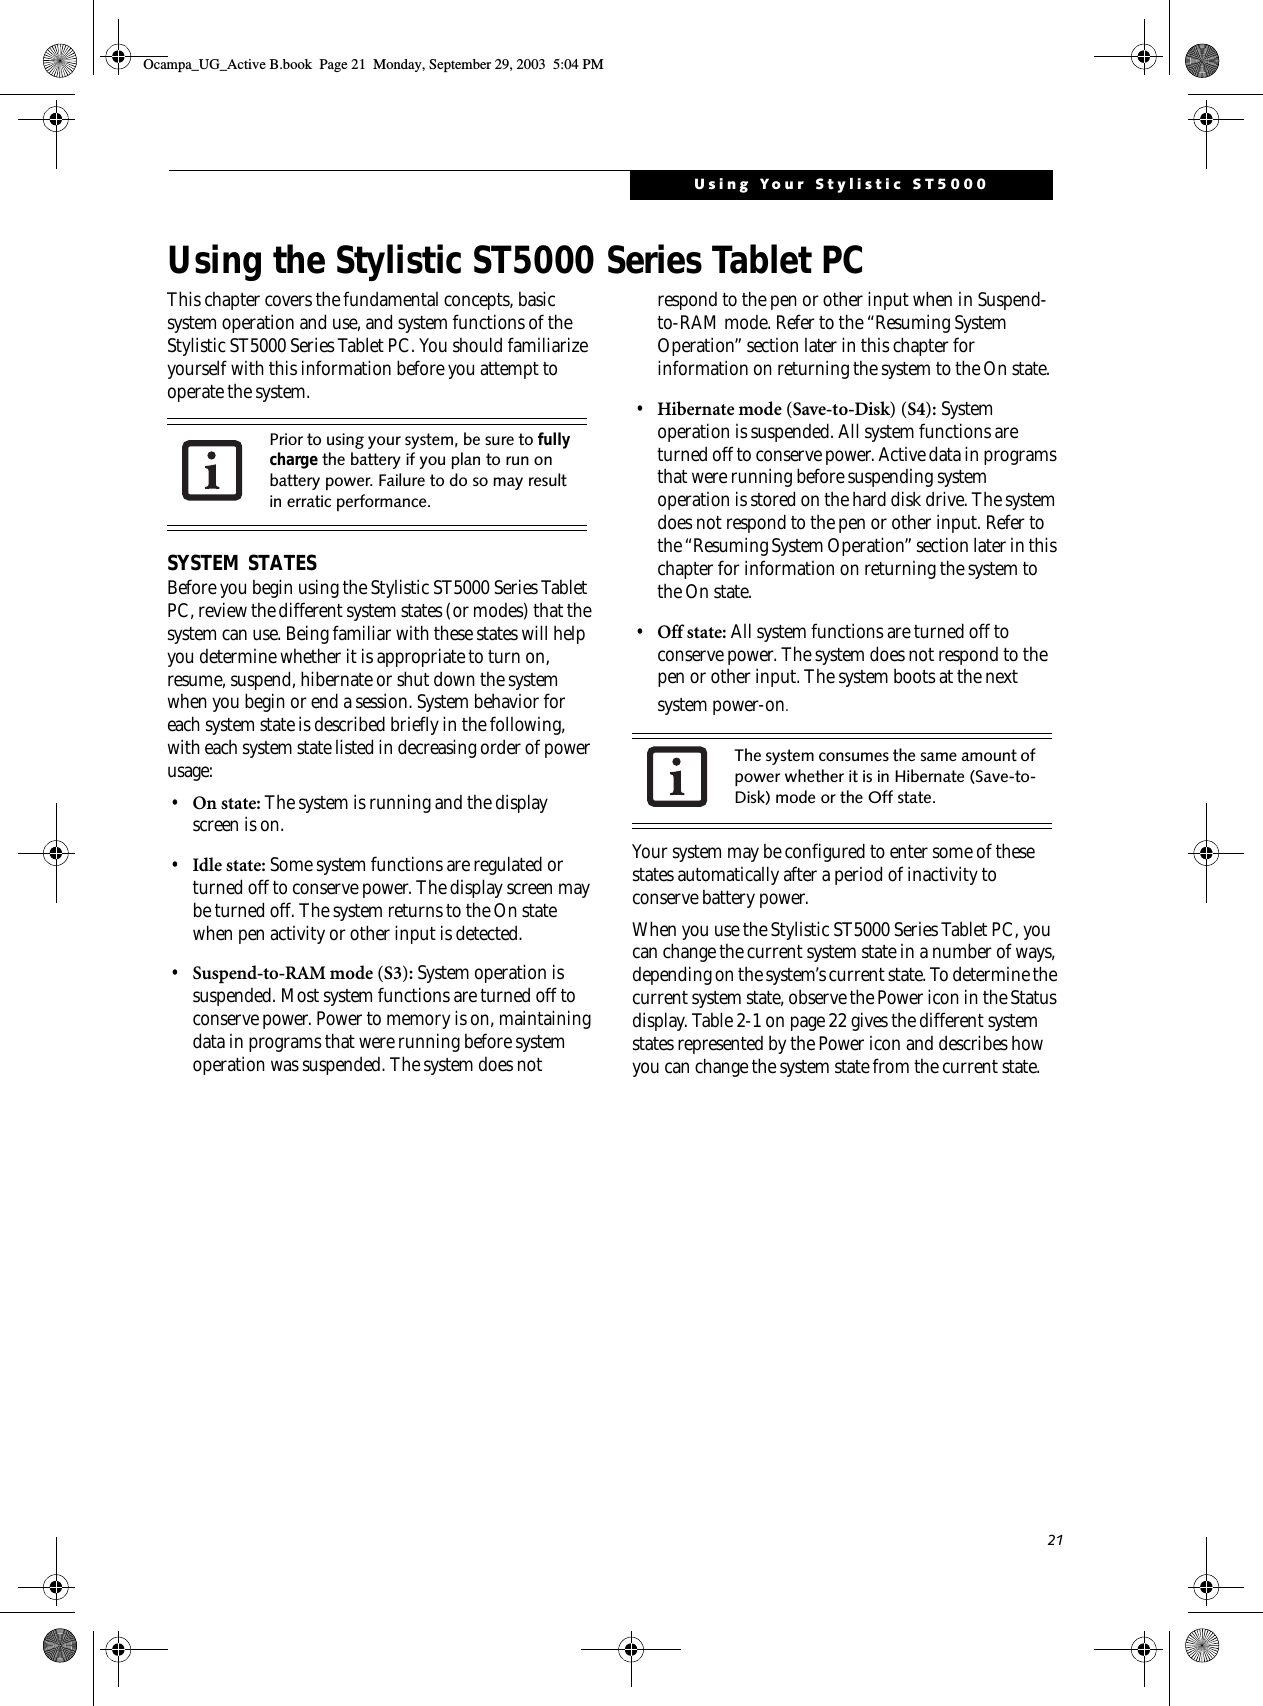 21Using Your Stylistic ST5000Using the Stylistic ST5000 Series Tablet PCThis chapter covers the fundamental concepts, basic system operation and use, and system functions of the Stylistic ST5000 Series Tablet PC. You should familiarize yourself with this information before you attempt to operate the system.SYSTEM STATESBefore you begin using the Stylistic ST5000 Series Tablet PC, review the different system states (or modes) that the system can use. Being familiar with these states will help you determine whether it is appropriate to turn on, resume, suspend, hibernate or shut down the system when you begin or end a session. System behavior for each system state is described briefly in the following, with each system state listed in decreasing order of power usage:•On state: The system is running and the display screen is on. •Idle state: Some system functions are regulated or turned off to conserve power. The display screen may be turned off. The system returns to the On state when pen activity or other input is detected. •Suspend-to-RAM mode (S3): System operation is suspended. Most system functions are turned off to conserve power. Power to memory is on, maintaining data in programs that were running before system operation was suspended. The system does not respond to the pen or other input when in Suspend-to-RAM mode. Refer to the “Resuming System Operation” section later in this chapter for information on returning the system to the On state.•Hibernate mode (Save-to-Disk) (S4): System operation is suspended. All system functions are turned off to conserve power. Active data in programs that were running before suspending system operation is stored on the hard disk drive. The system does not respond to the pen or other input. Refer to the “Resuming System Operation” section later in this chapter for information on returning the system to the On state.•Off state: All system functions are turned off to conserve power. The system does not respond to the pen or other input. The system boots at the next system power-on.Your system may be configured to enter some of these states automatically after a period of inactivity to conserve battery power. When you use the Stylistic ST5000 Series Tablet PC, you can change the current system state in a number of ways, depending on the system’s current state. To determine the current system state, observe the Power icon in the Status display. Table 2-1 on page 22 gives the different system states represented by the Power icon and describes how you can change the system state from the current state.Prior to using your system, be sure to fully charge the battery if you plan to run on battery power. Failure to do so may result in erratic performance. The system consumes the same amount of power whether it is in Hibernate (Save-to-Disk) mode or the Off state. Ocampa_UG_Active B.book  Page 21  Monday, September 29, 2003  5:04 PM